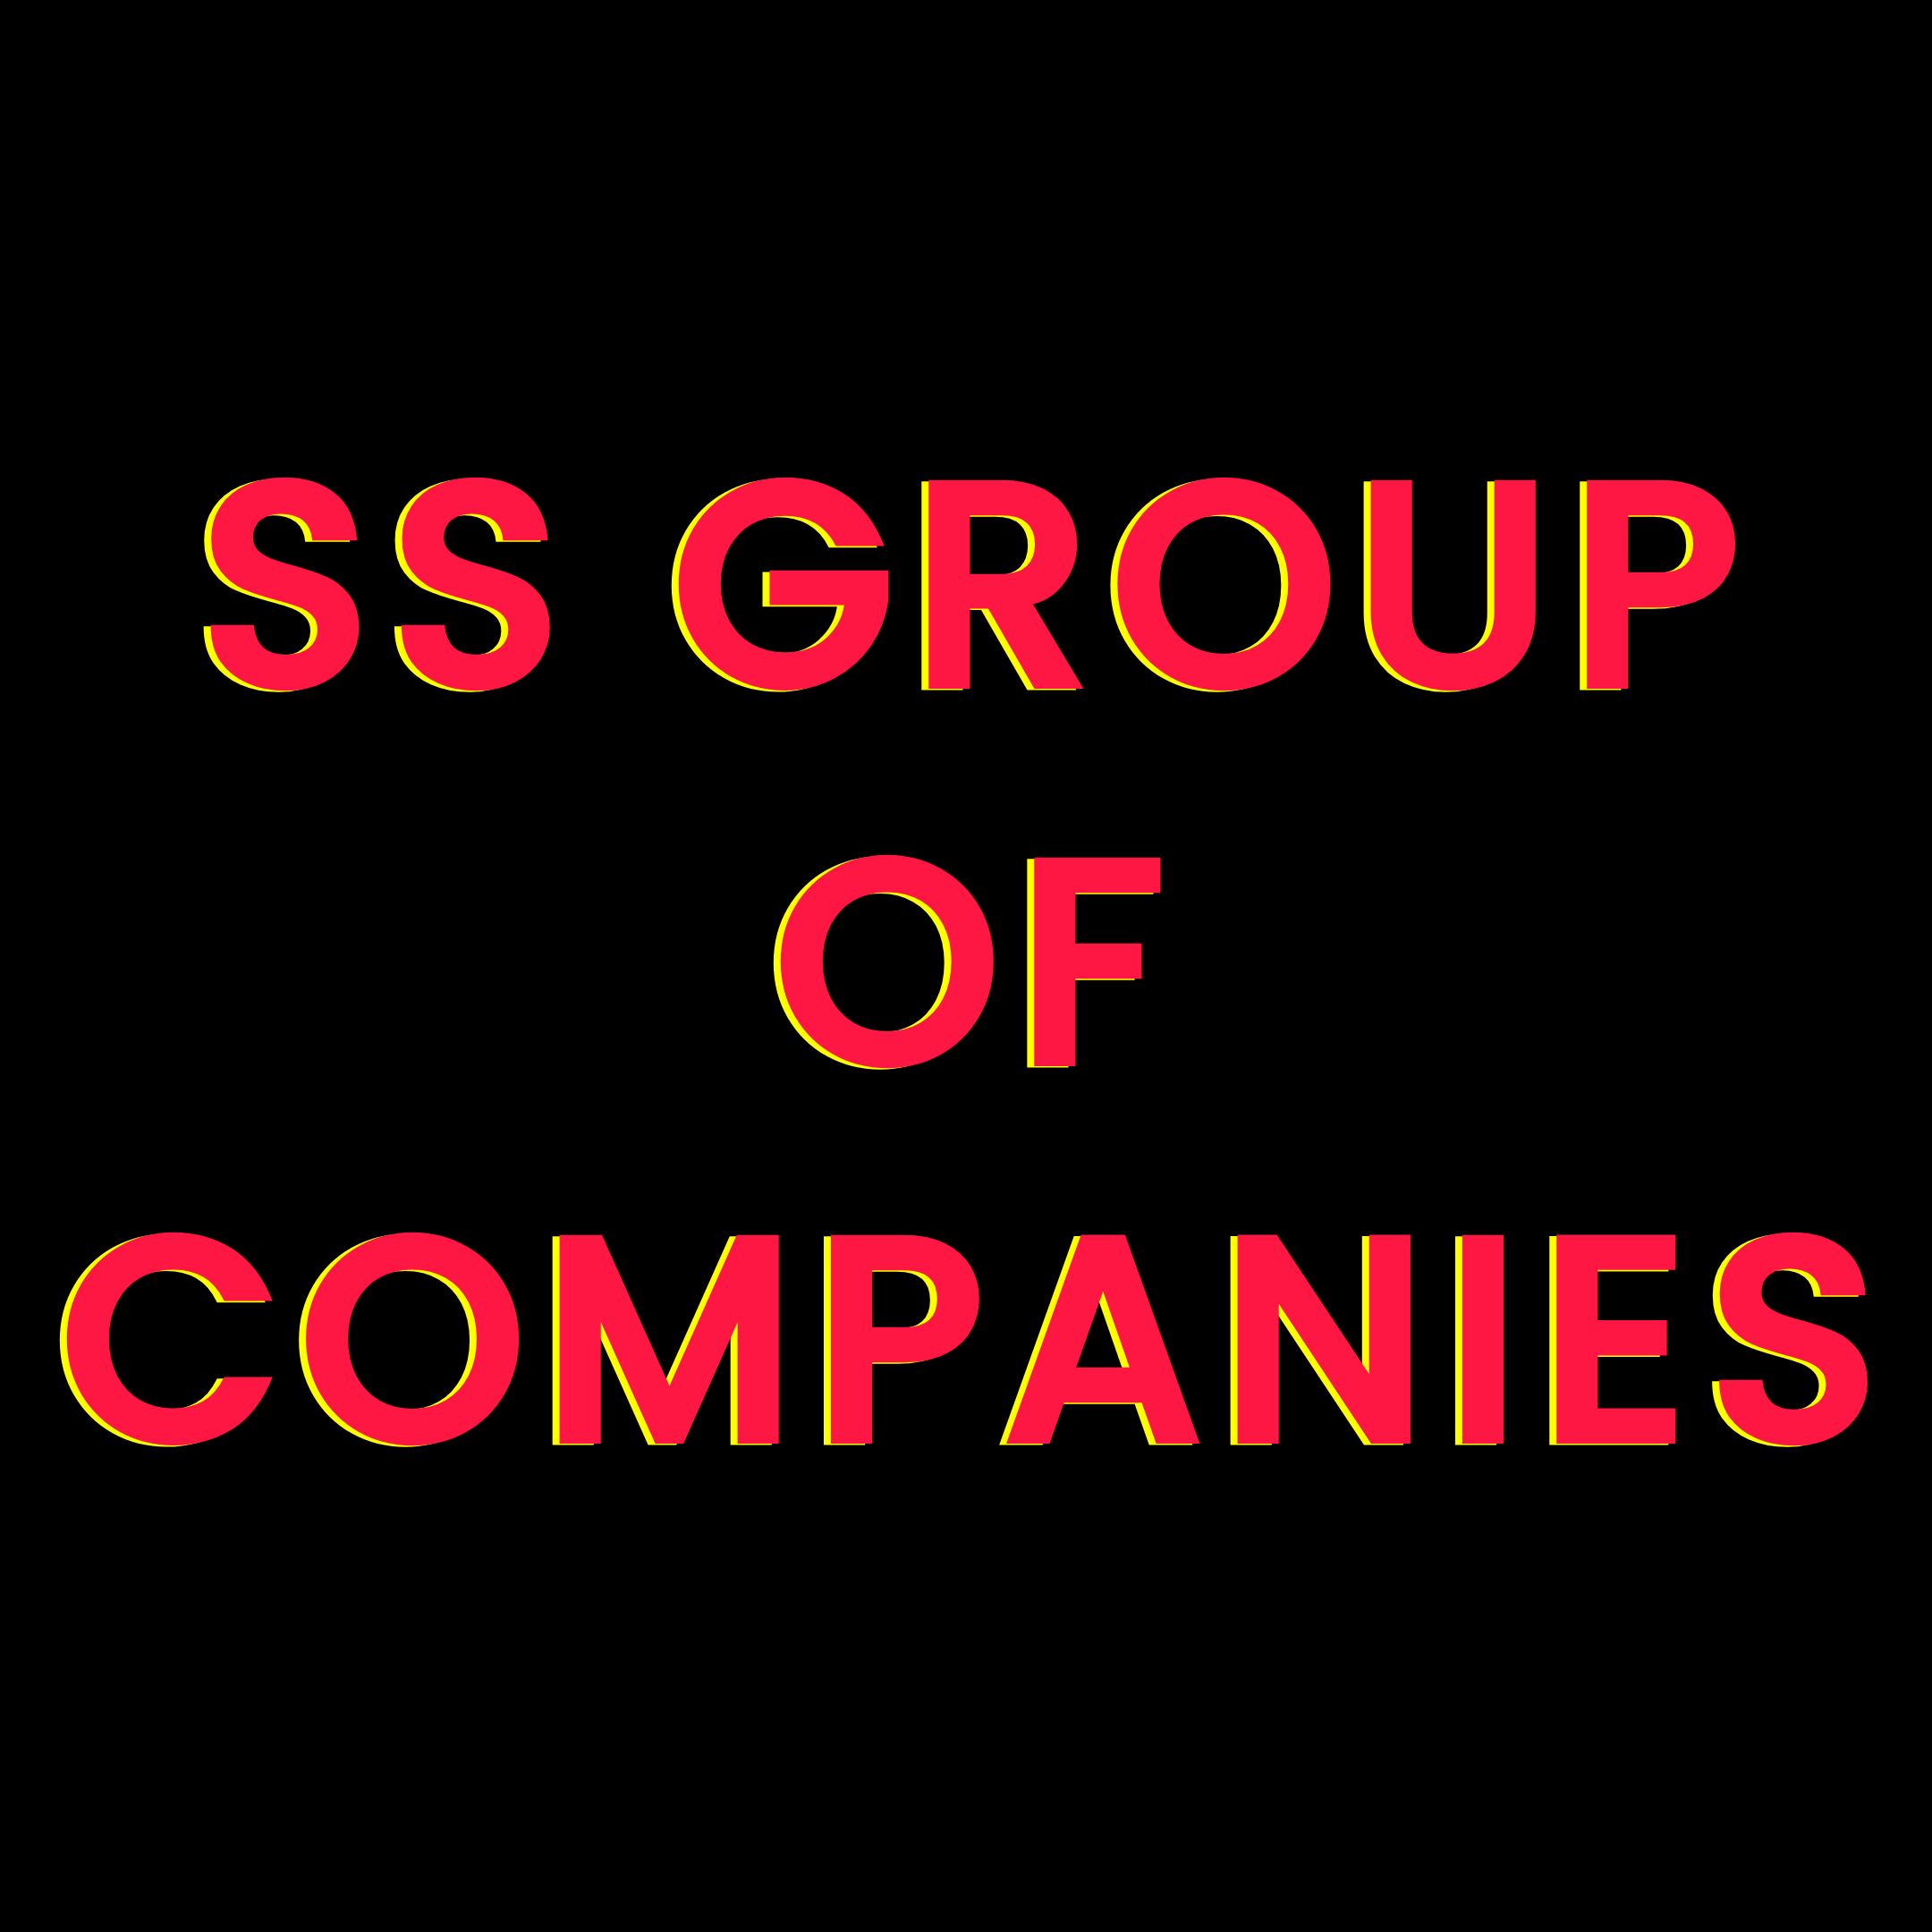 SS GROUP OF COMPANIES